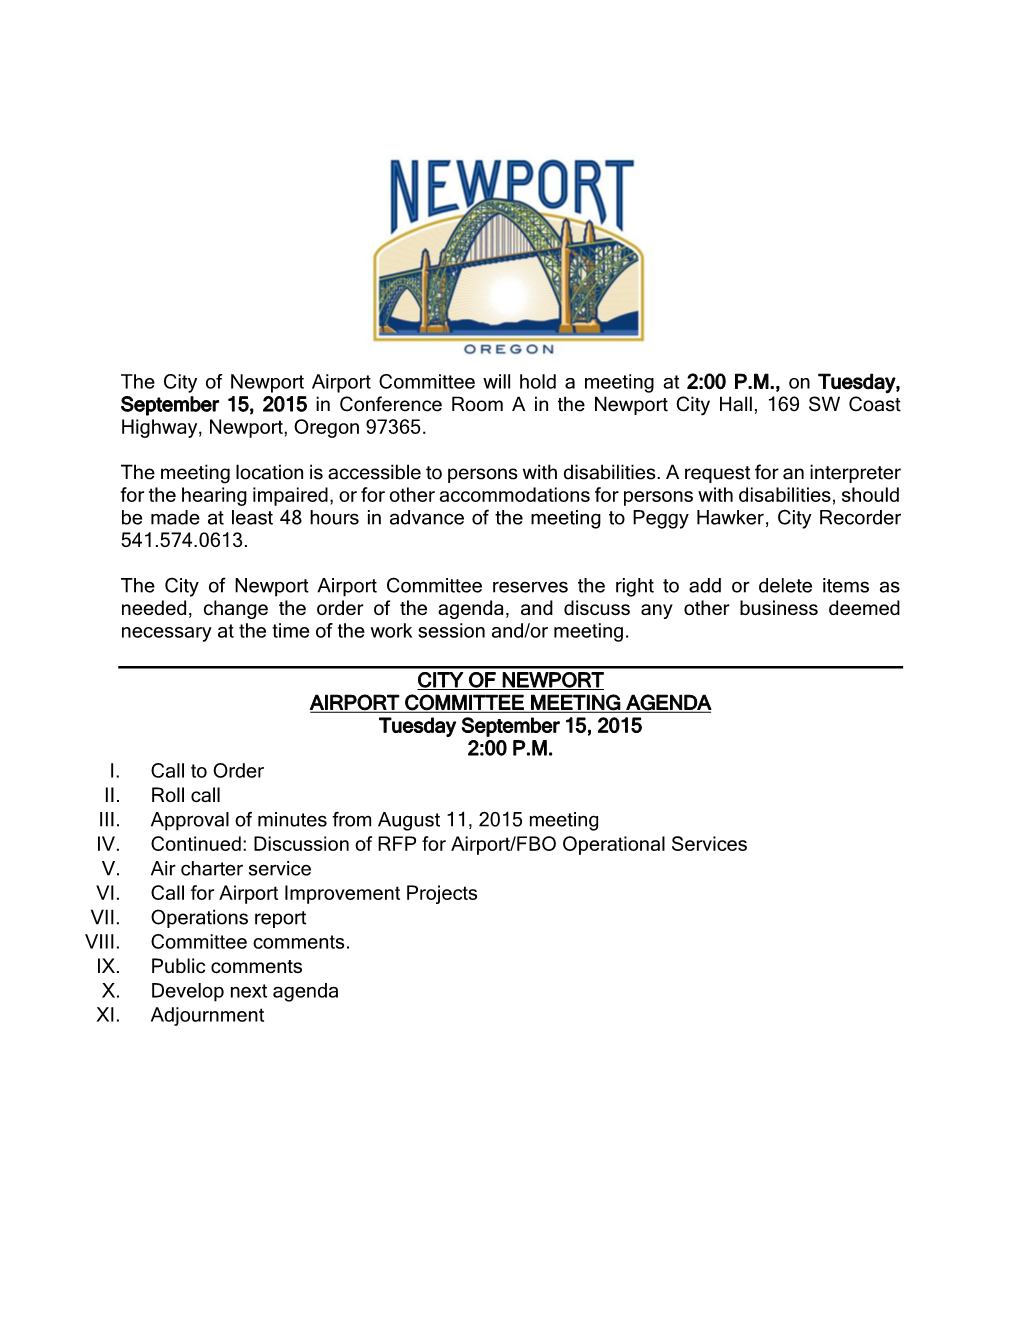 The City of Newport Airport Committee Will Hold a Meeting at 2:00 P.M., On